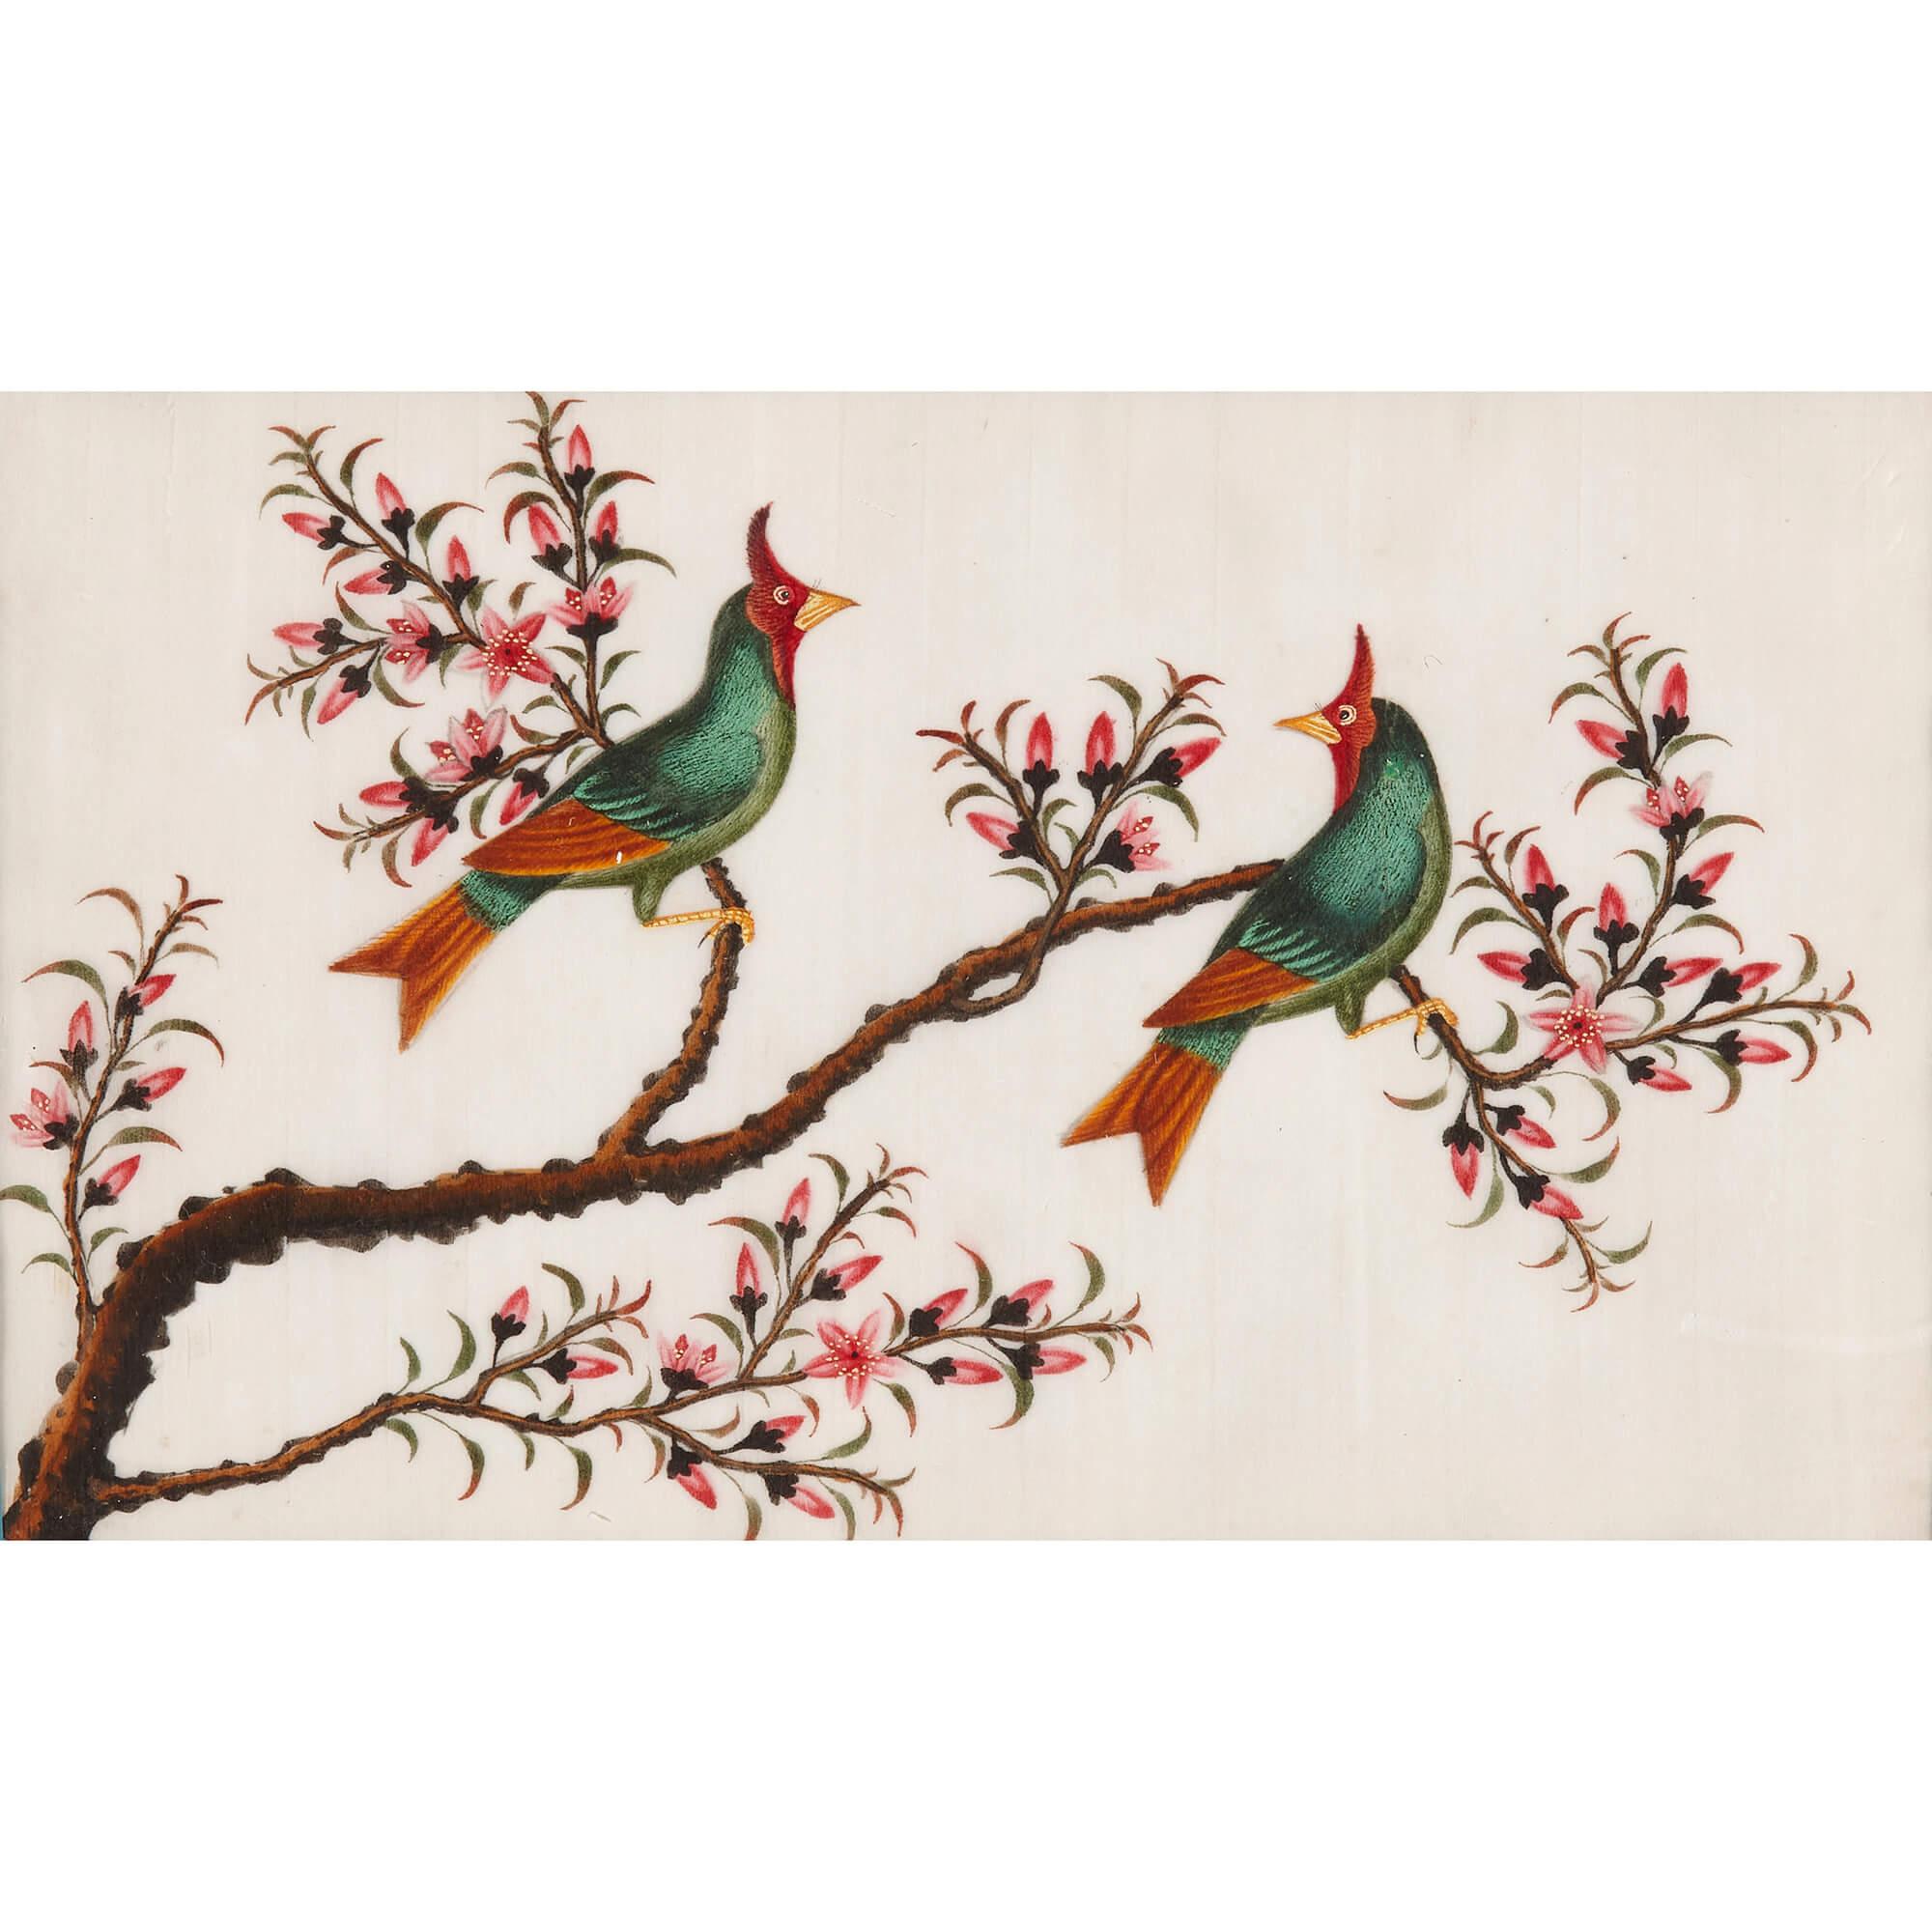 Set of twelve antique Chinese painted bird studies on pith paper
Chinese, 19th Century
Panel: Height 20cm, width 32cm
Frame: Height 35.5cm, width 47cm, depth 1.5cm

This fantastic collection of ornithological paintings wow with their vibrant